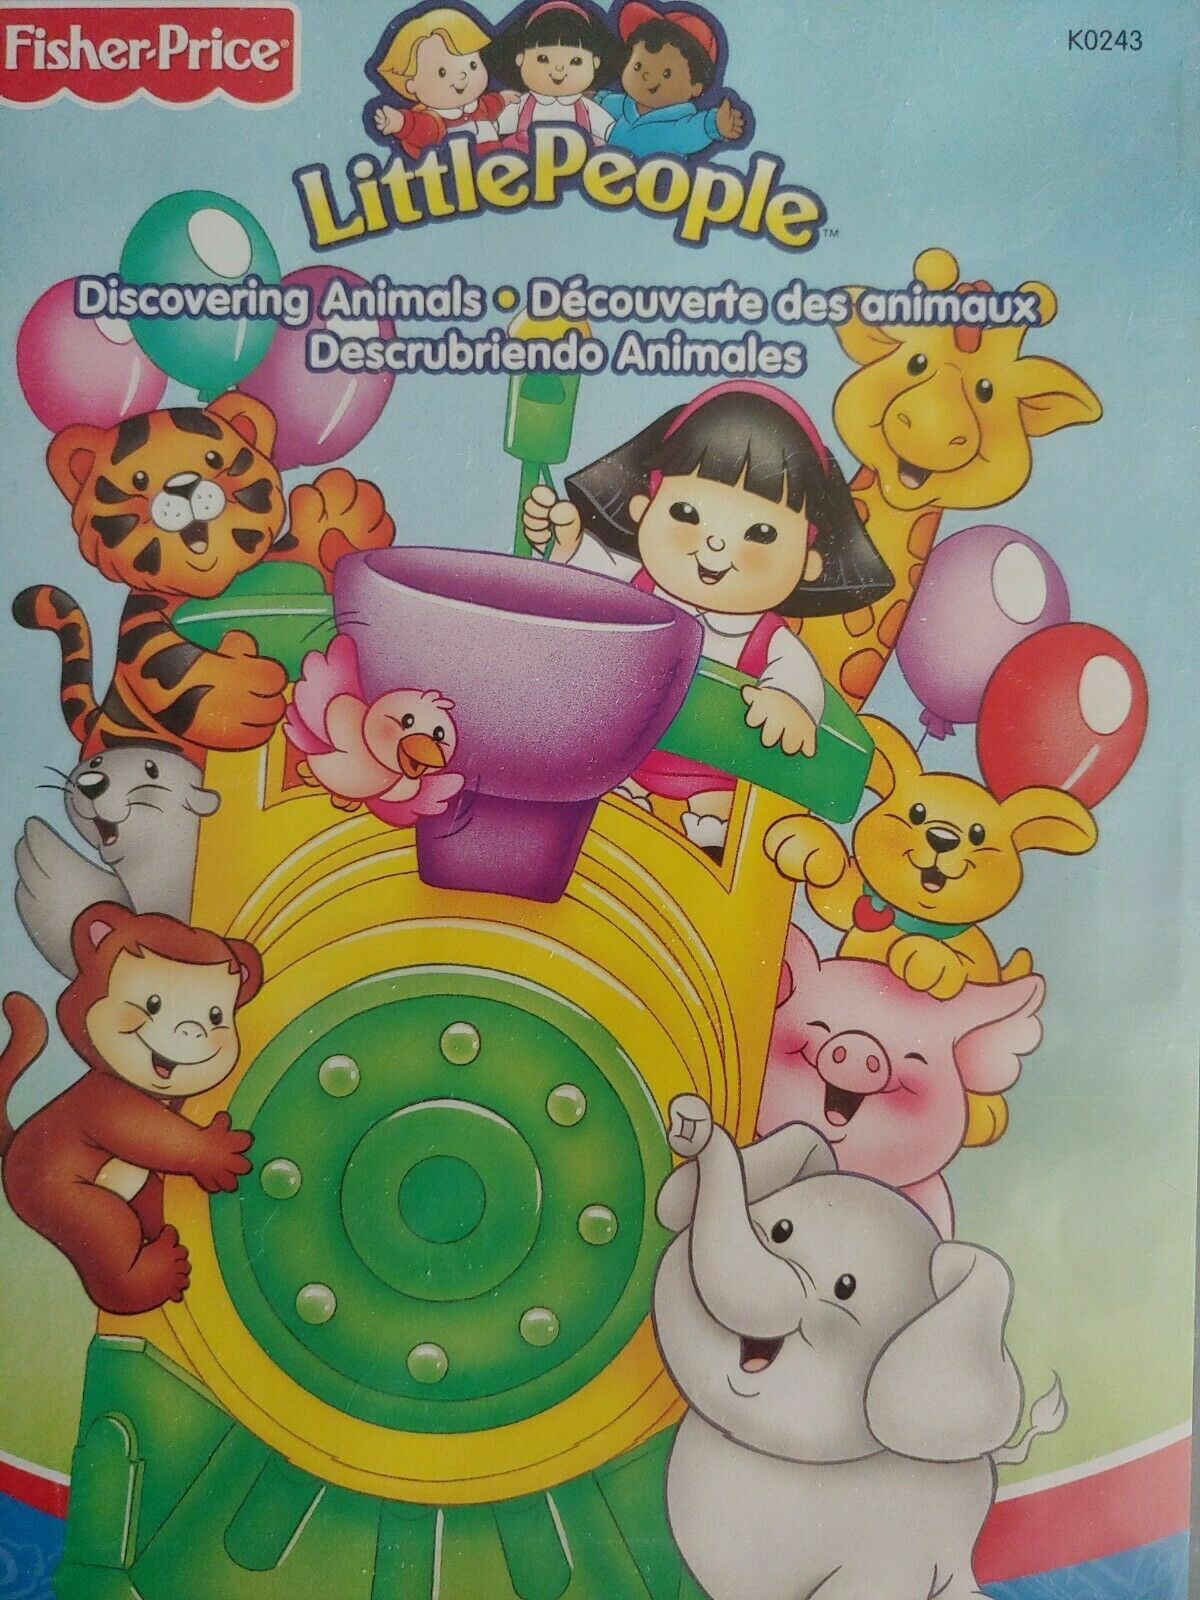 Fisher Price Little Pople, Vol. 3: Discovering Animals - DVD